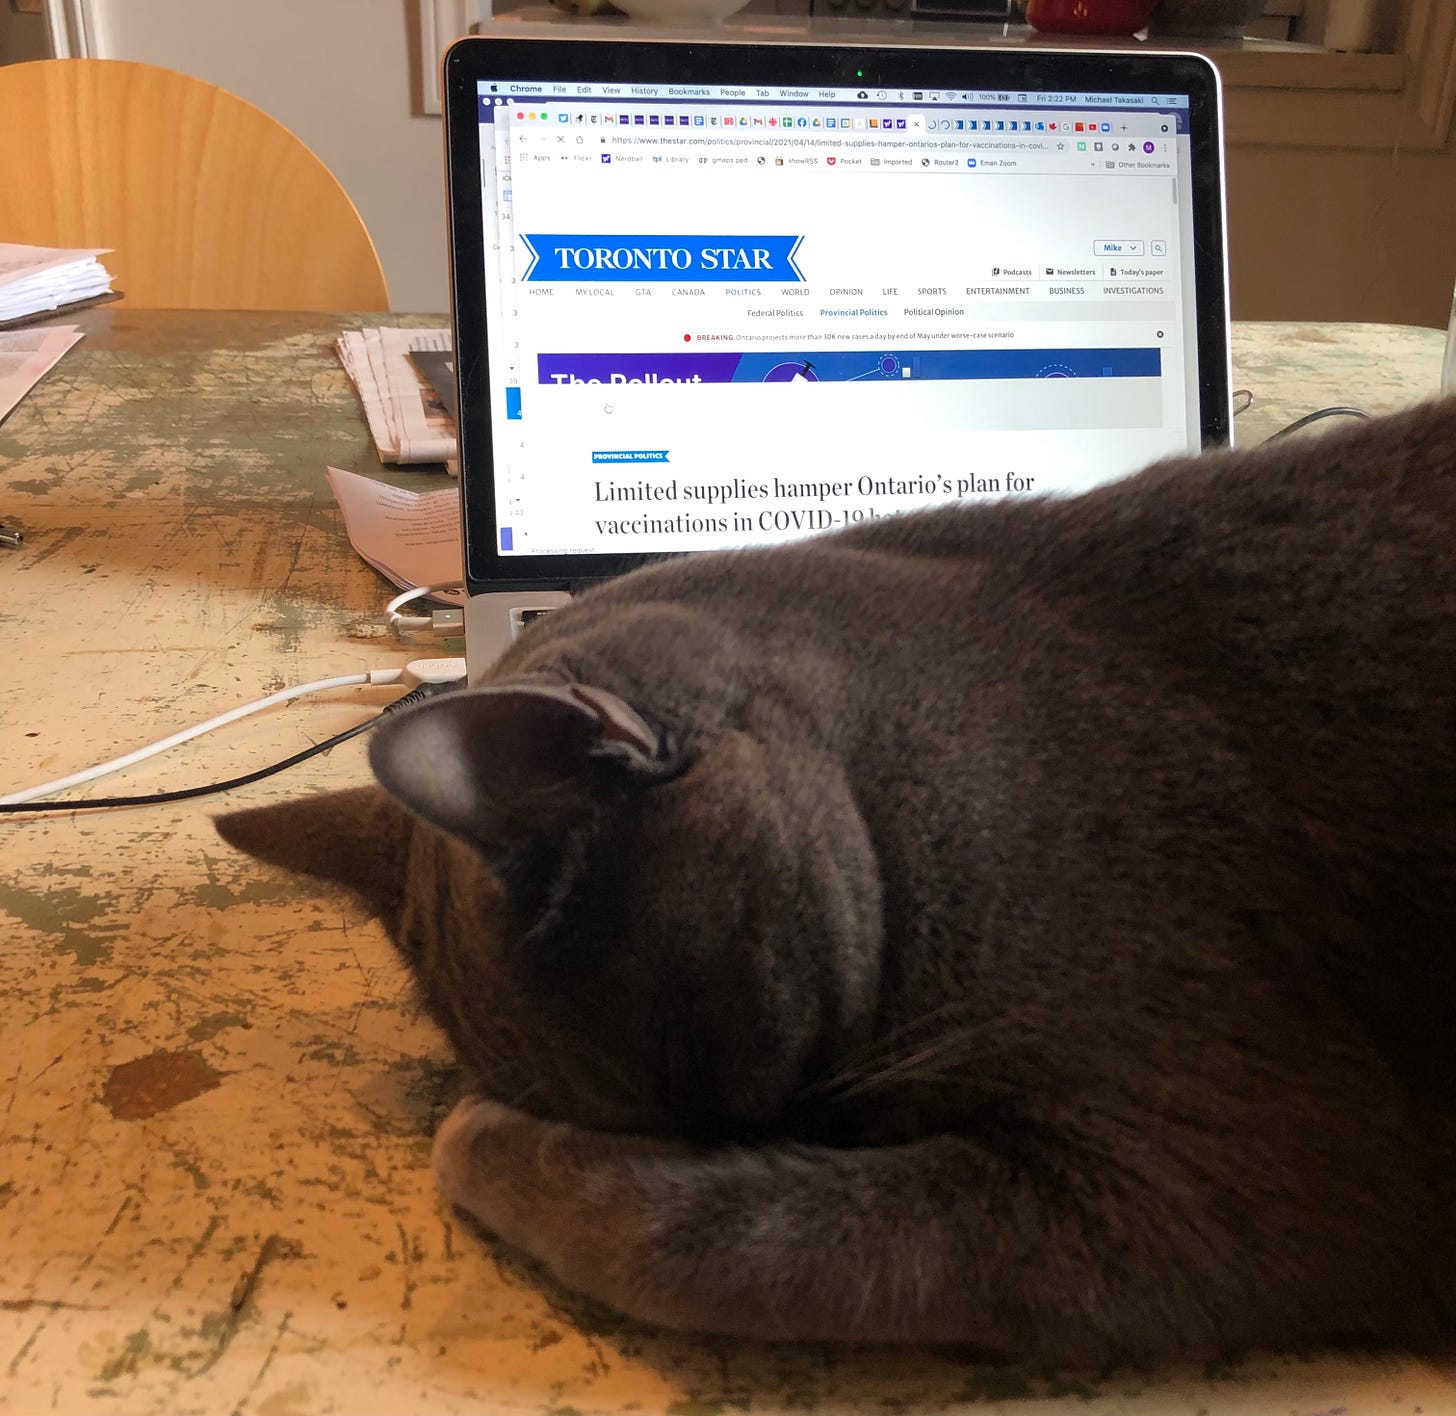 A cat appears to be palming his face in disbelief. Behind him there's a laptop with a news article open. The headline reads, "Limited supplies hamper Ontario's plan for vaccinations.